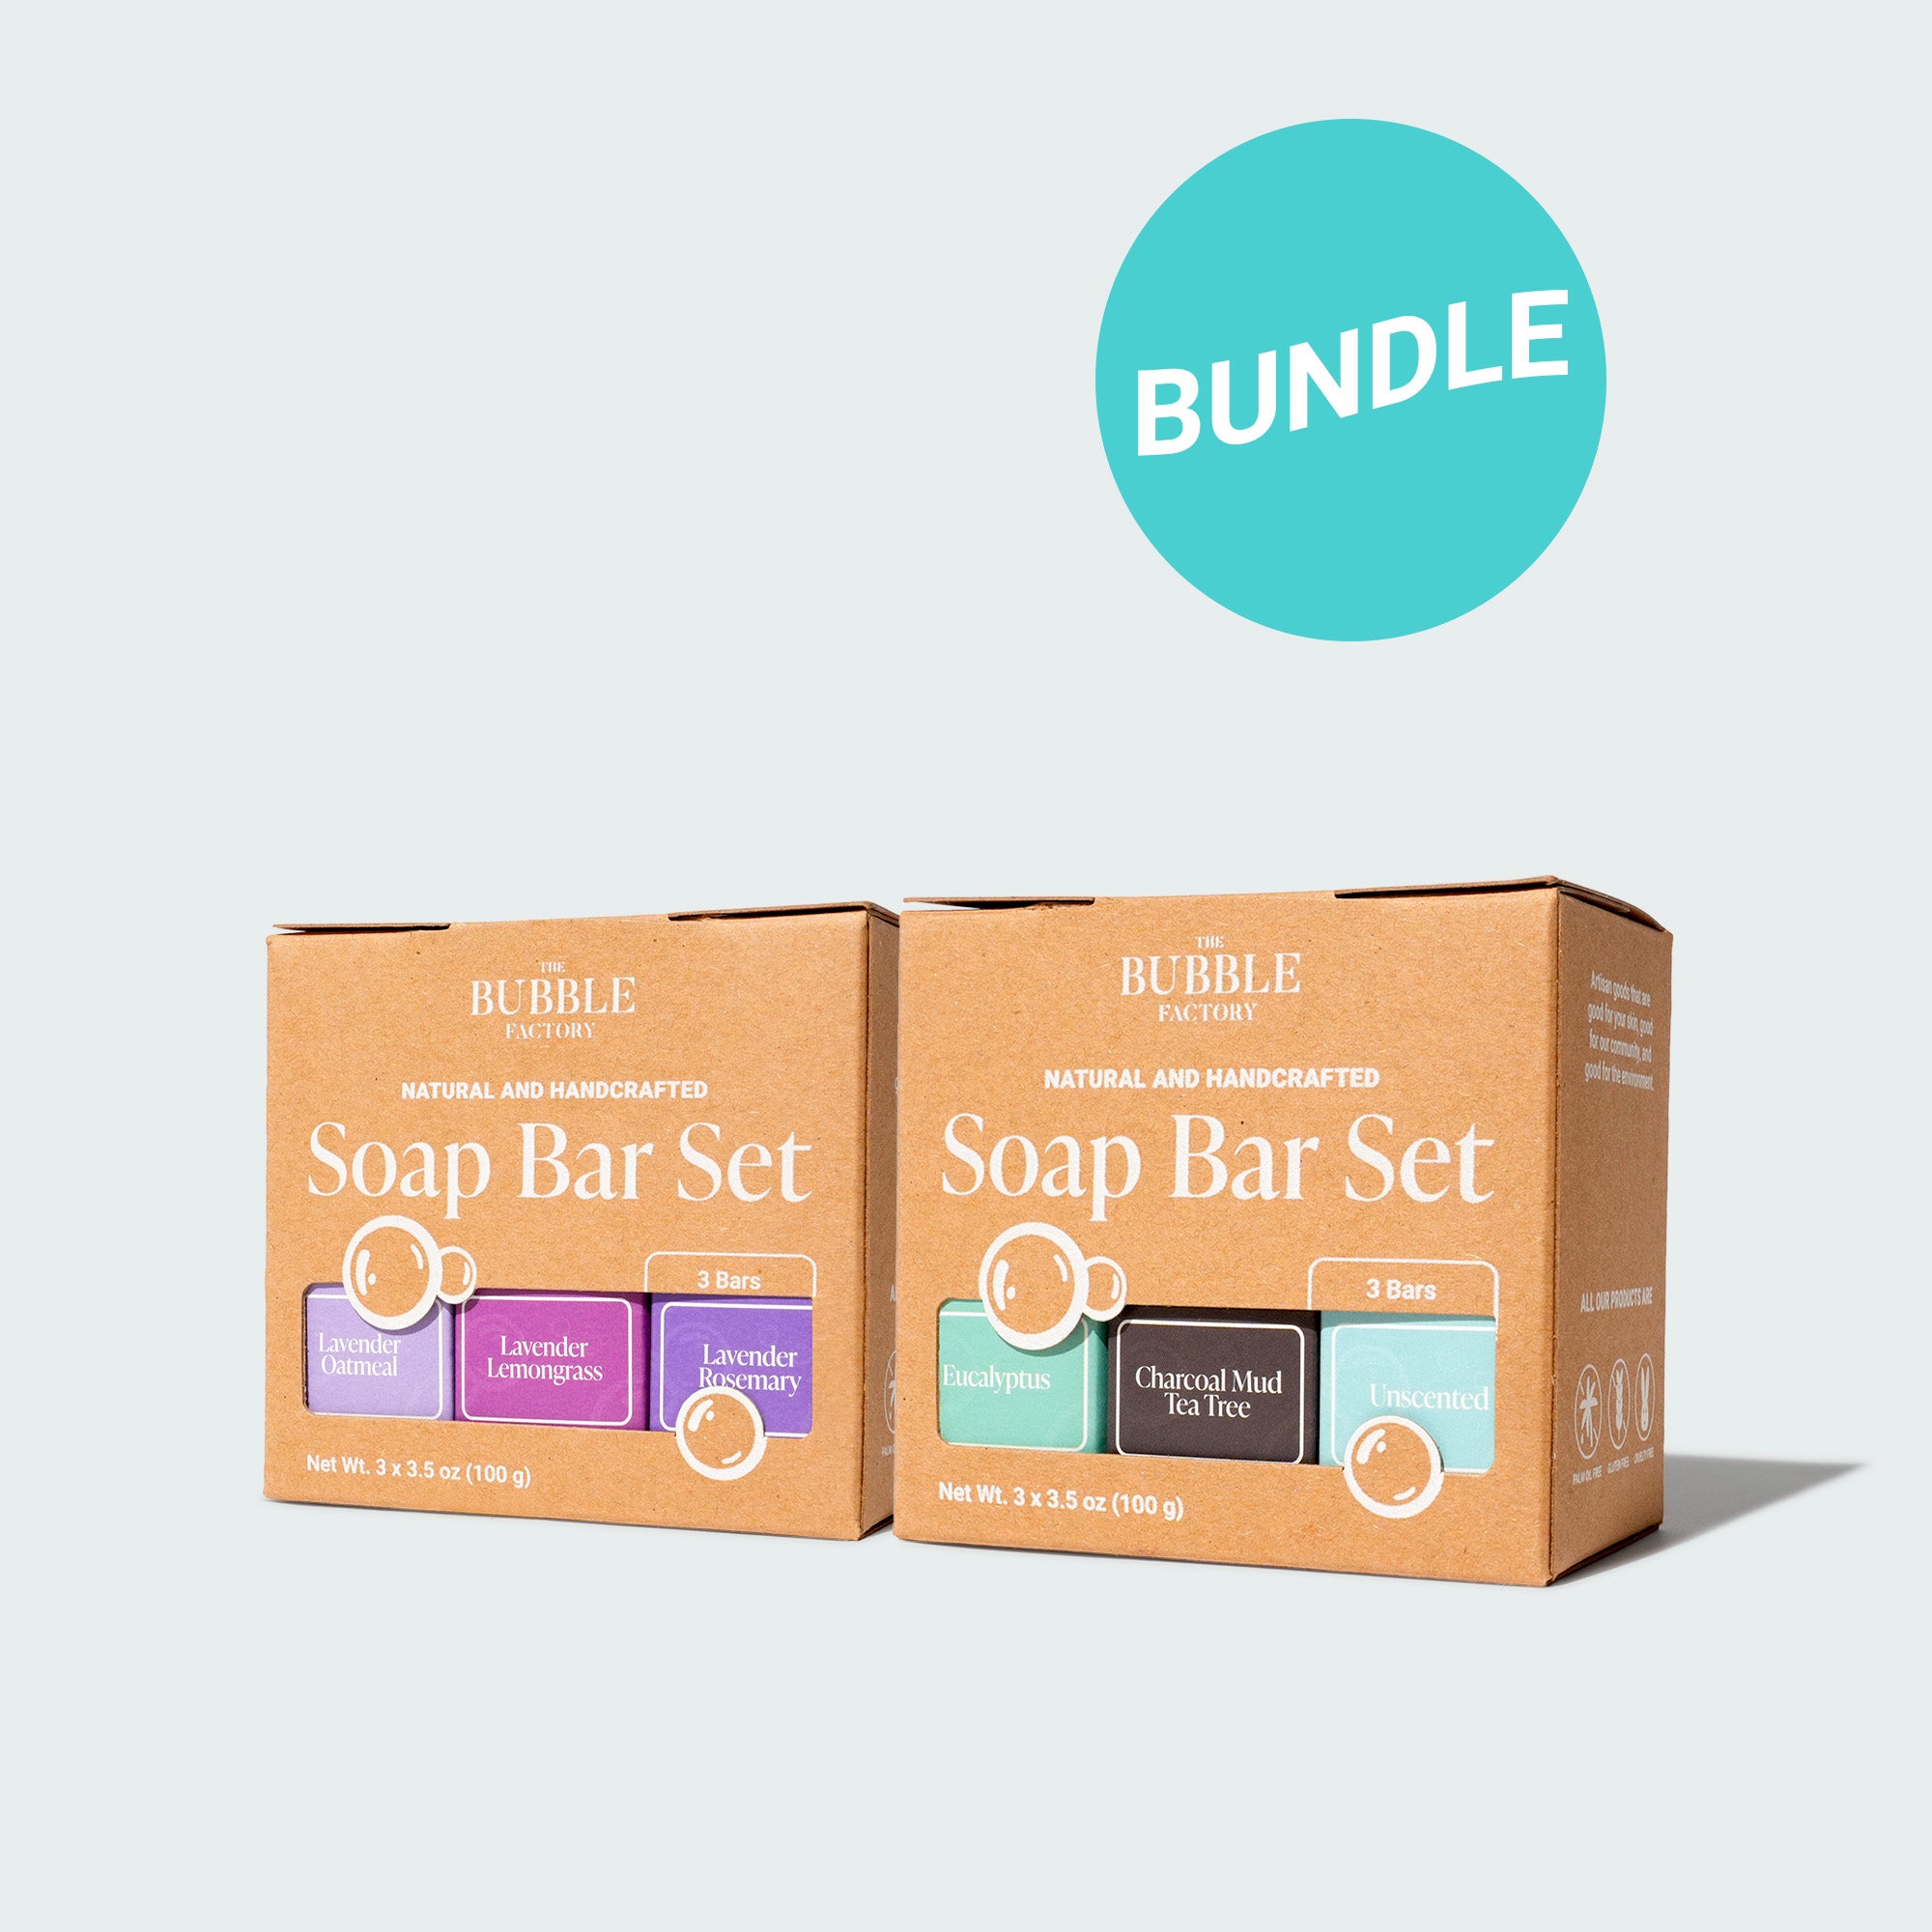 The Pure Serenity Natural Soap Bundle